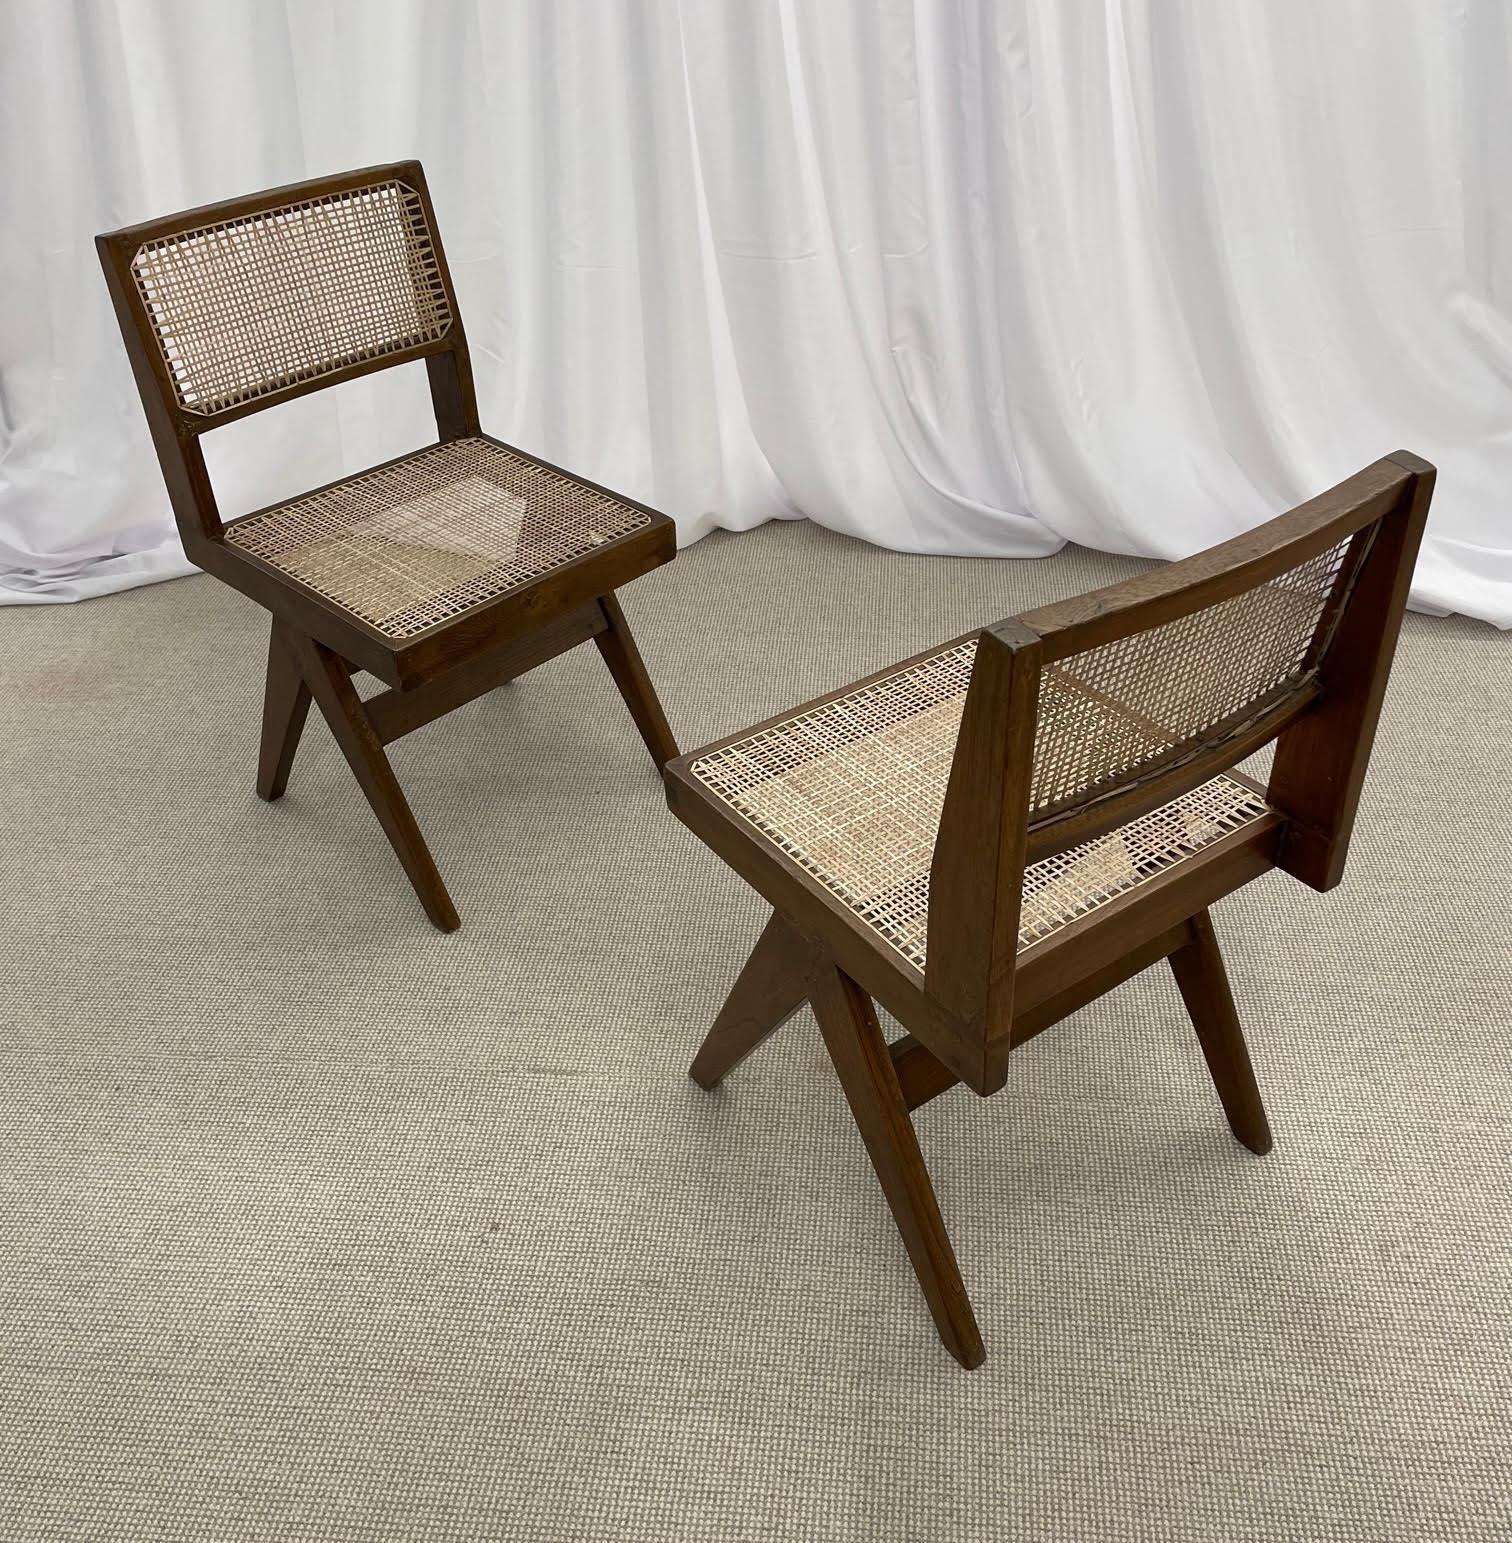 Mid-20th Century Pair of Mid-Century Modern Pierre Jeanneret Armless Dining Chairs, Teak, Cane